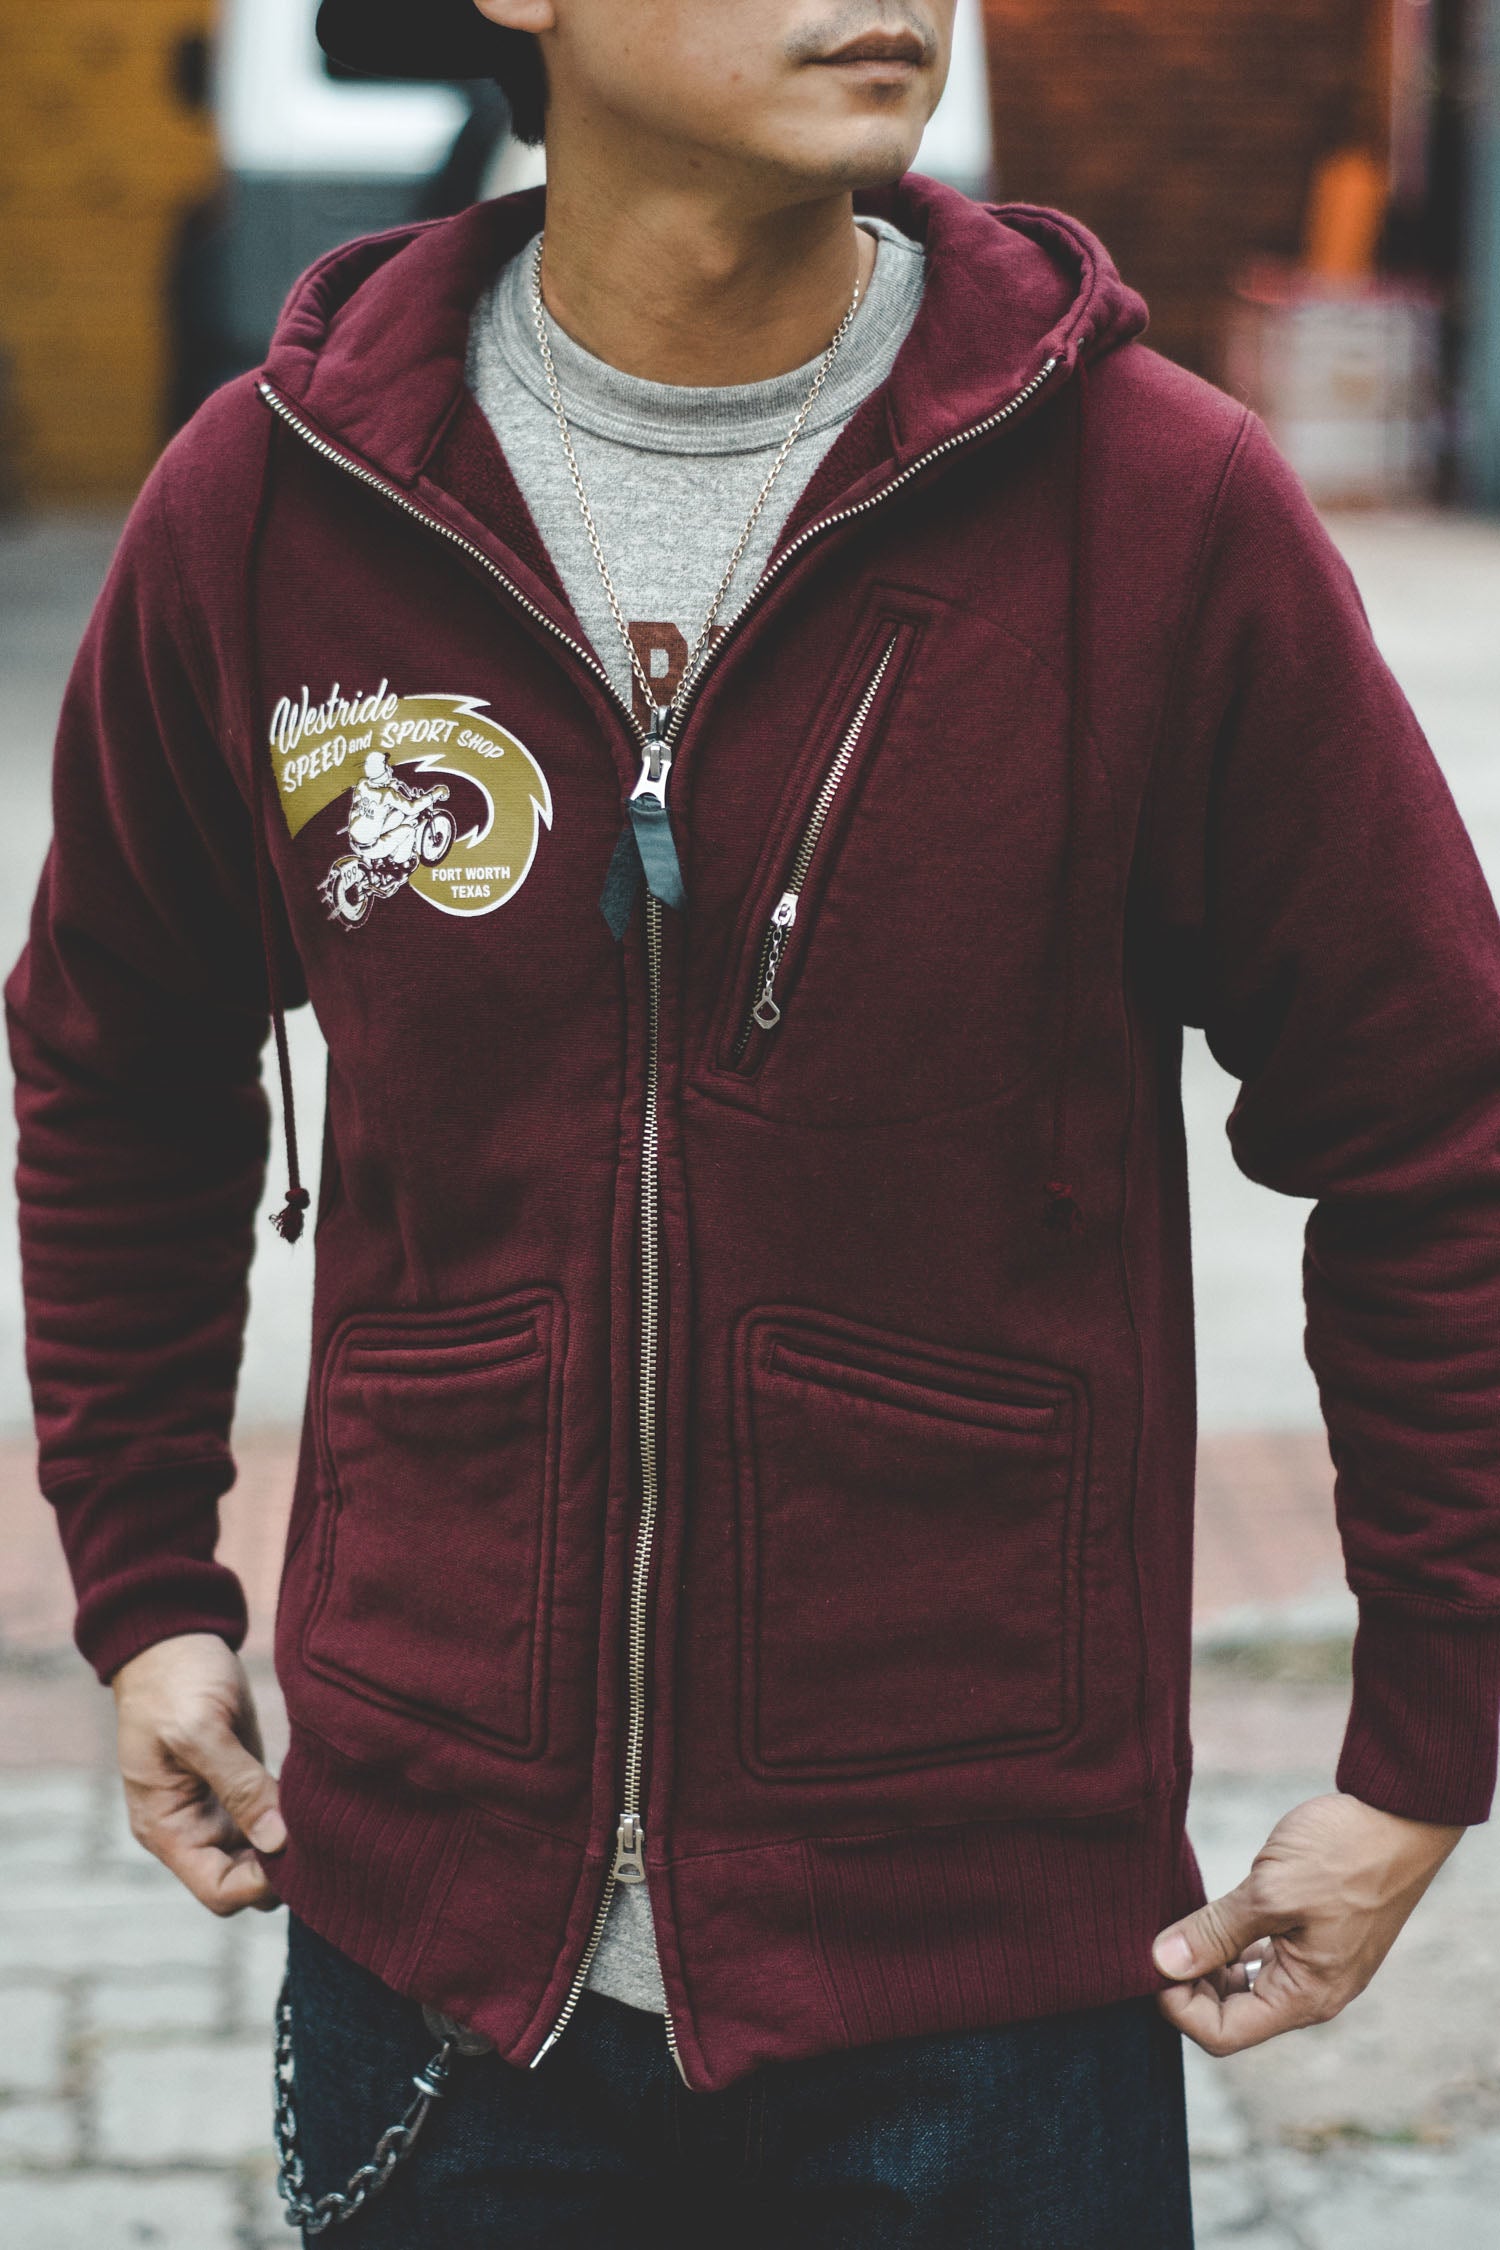 HEAVY WEIGHT FULL ZIP HOODIE - SPEED AND SPORT SHOP (WINE RED) - May club